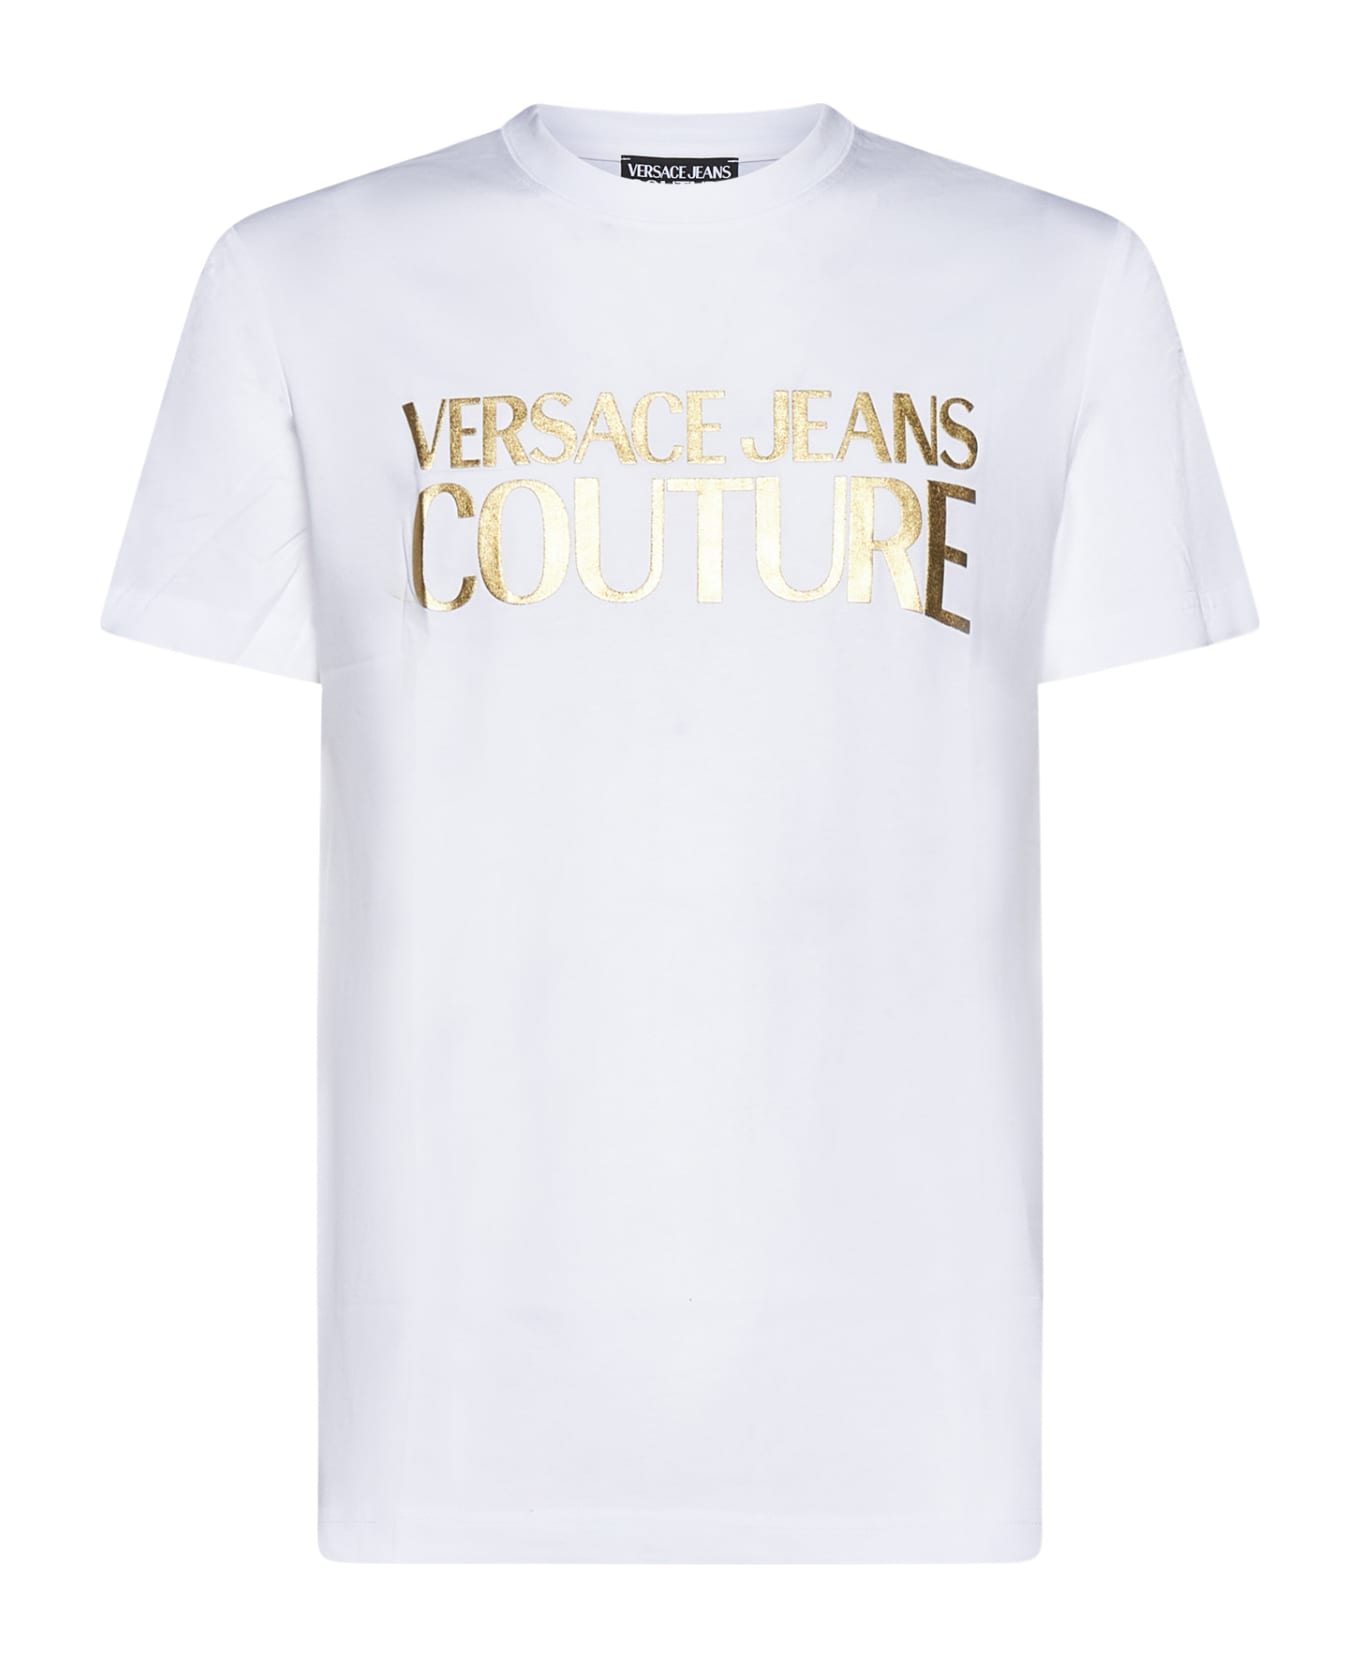 Versace Jeans Couture Logoed T-shirt - White Gold